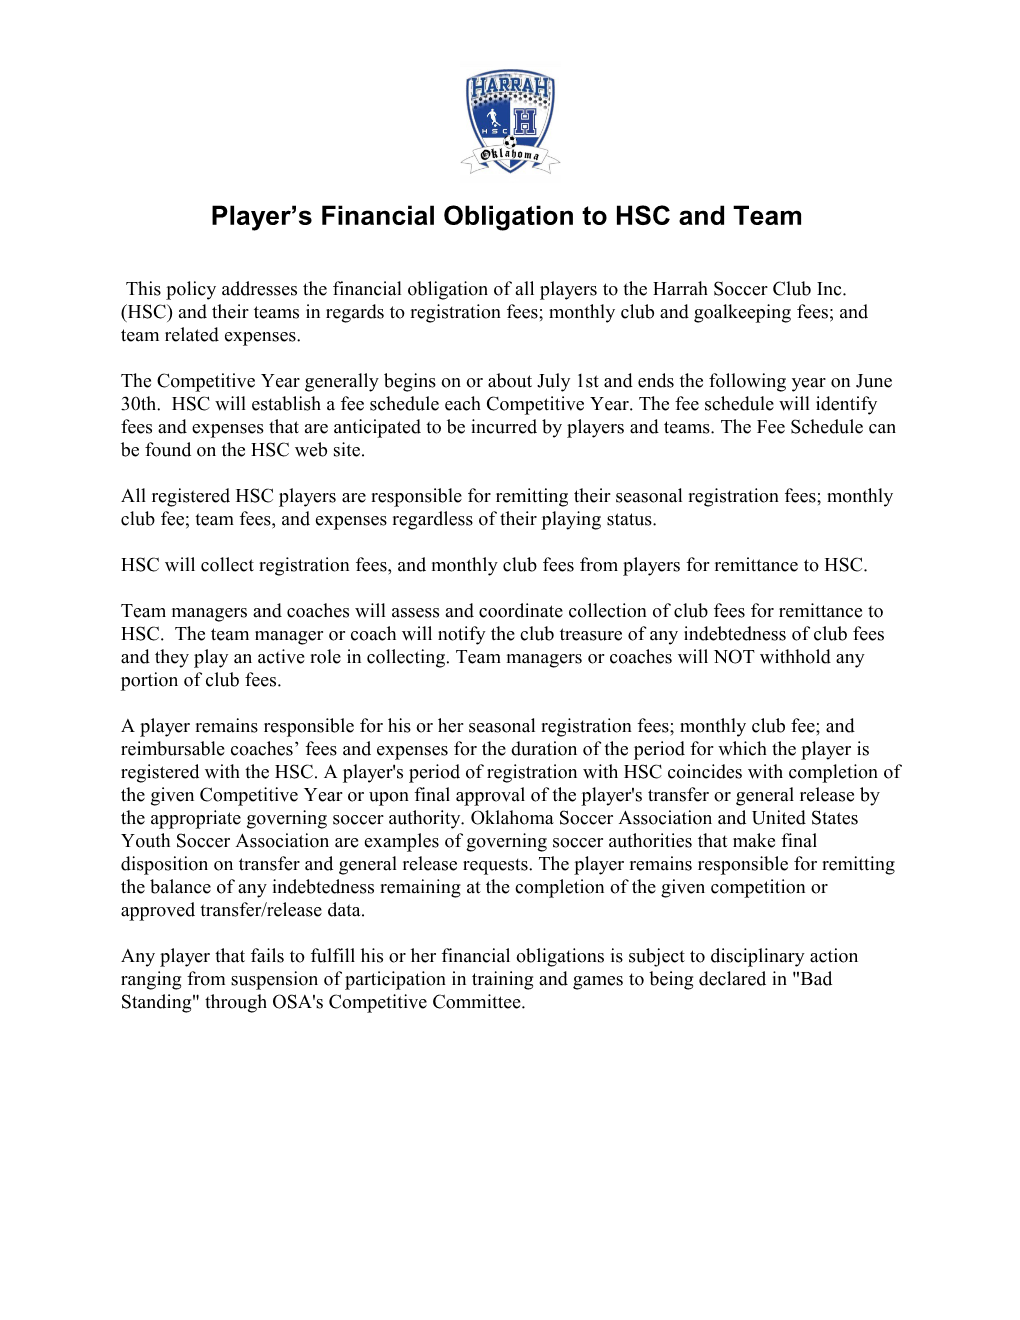 Player S Financial Obligation to HSC and Team